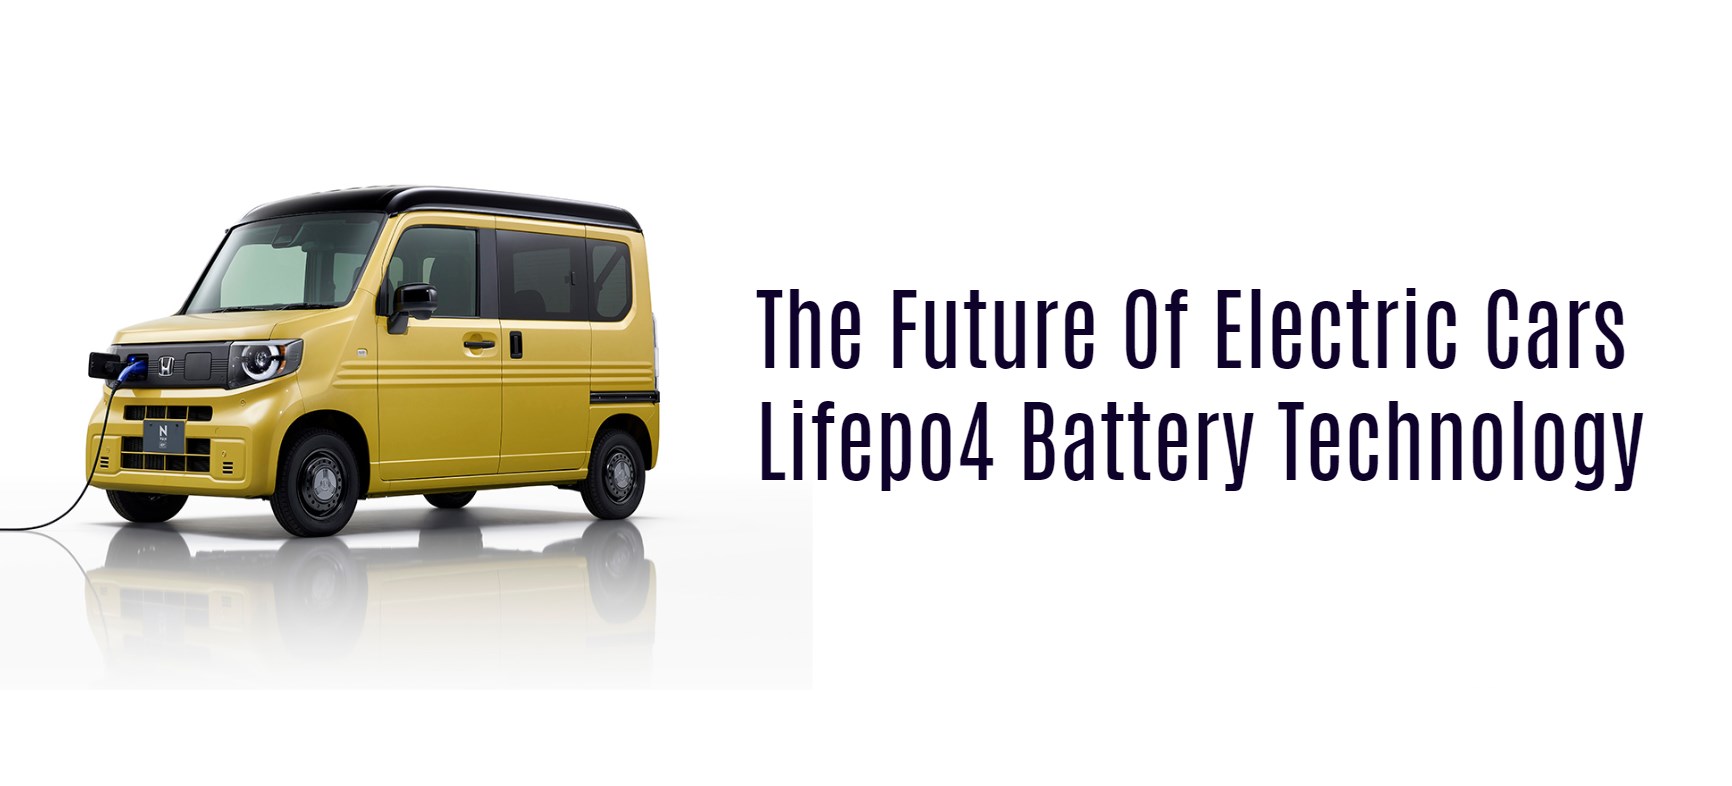 The Future Of Electric Cars Lifepo4 Battery Technology